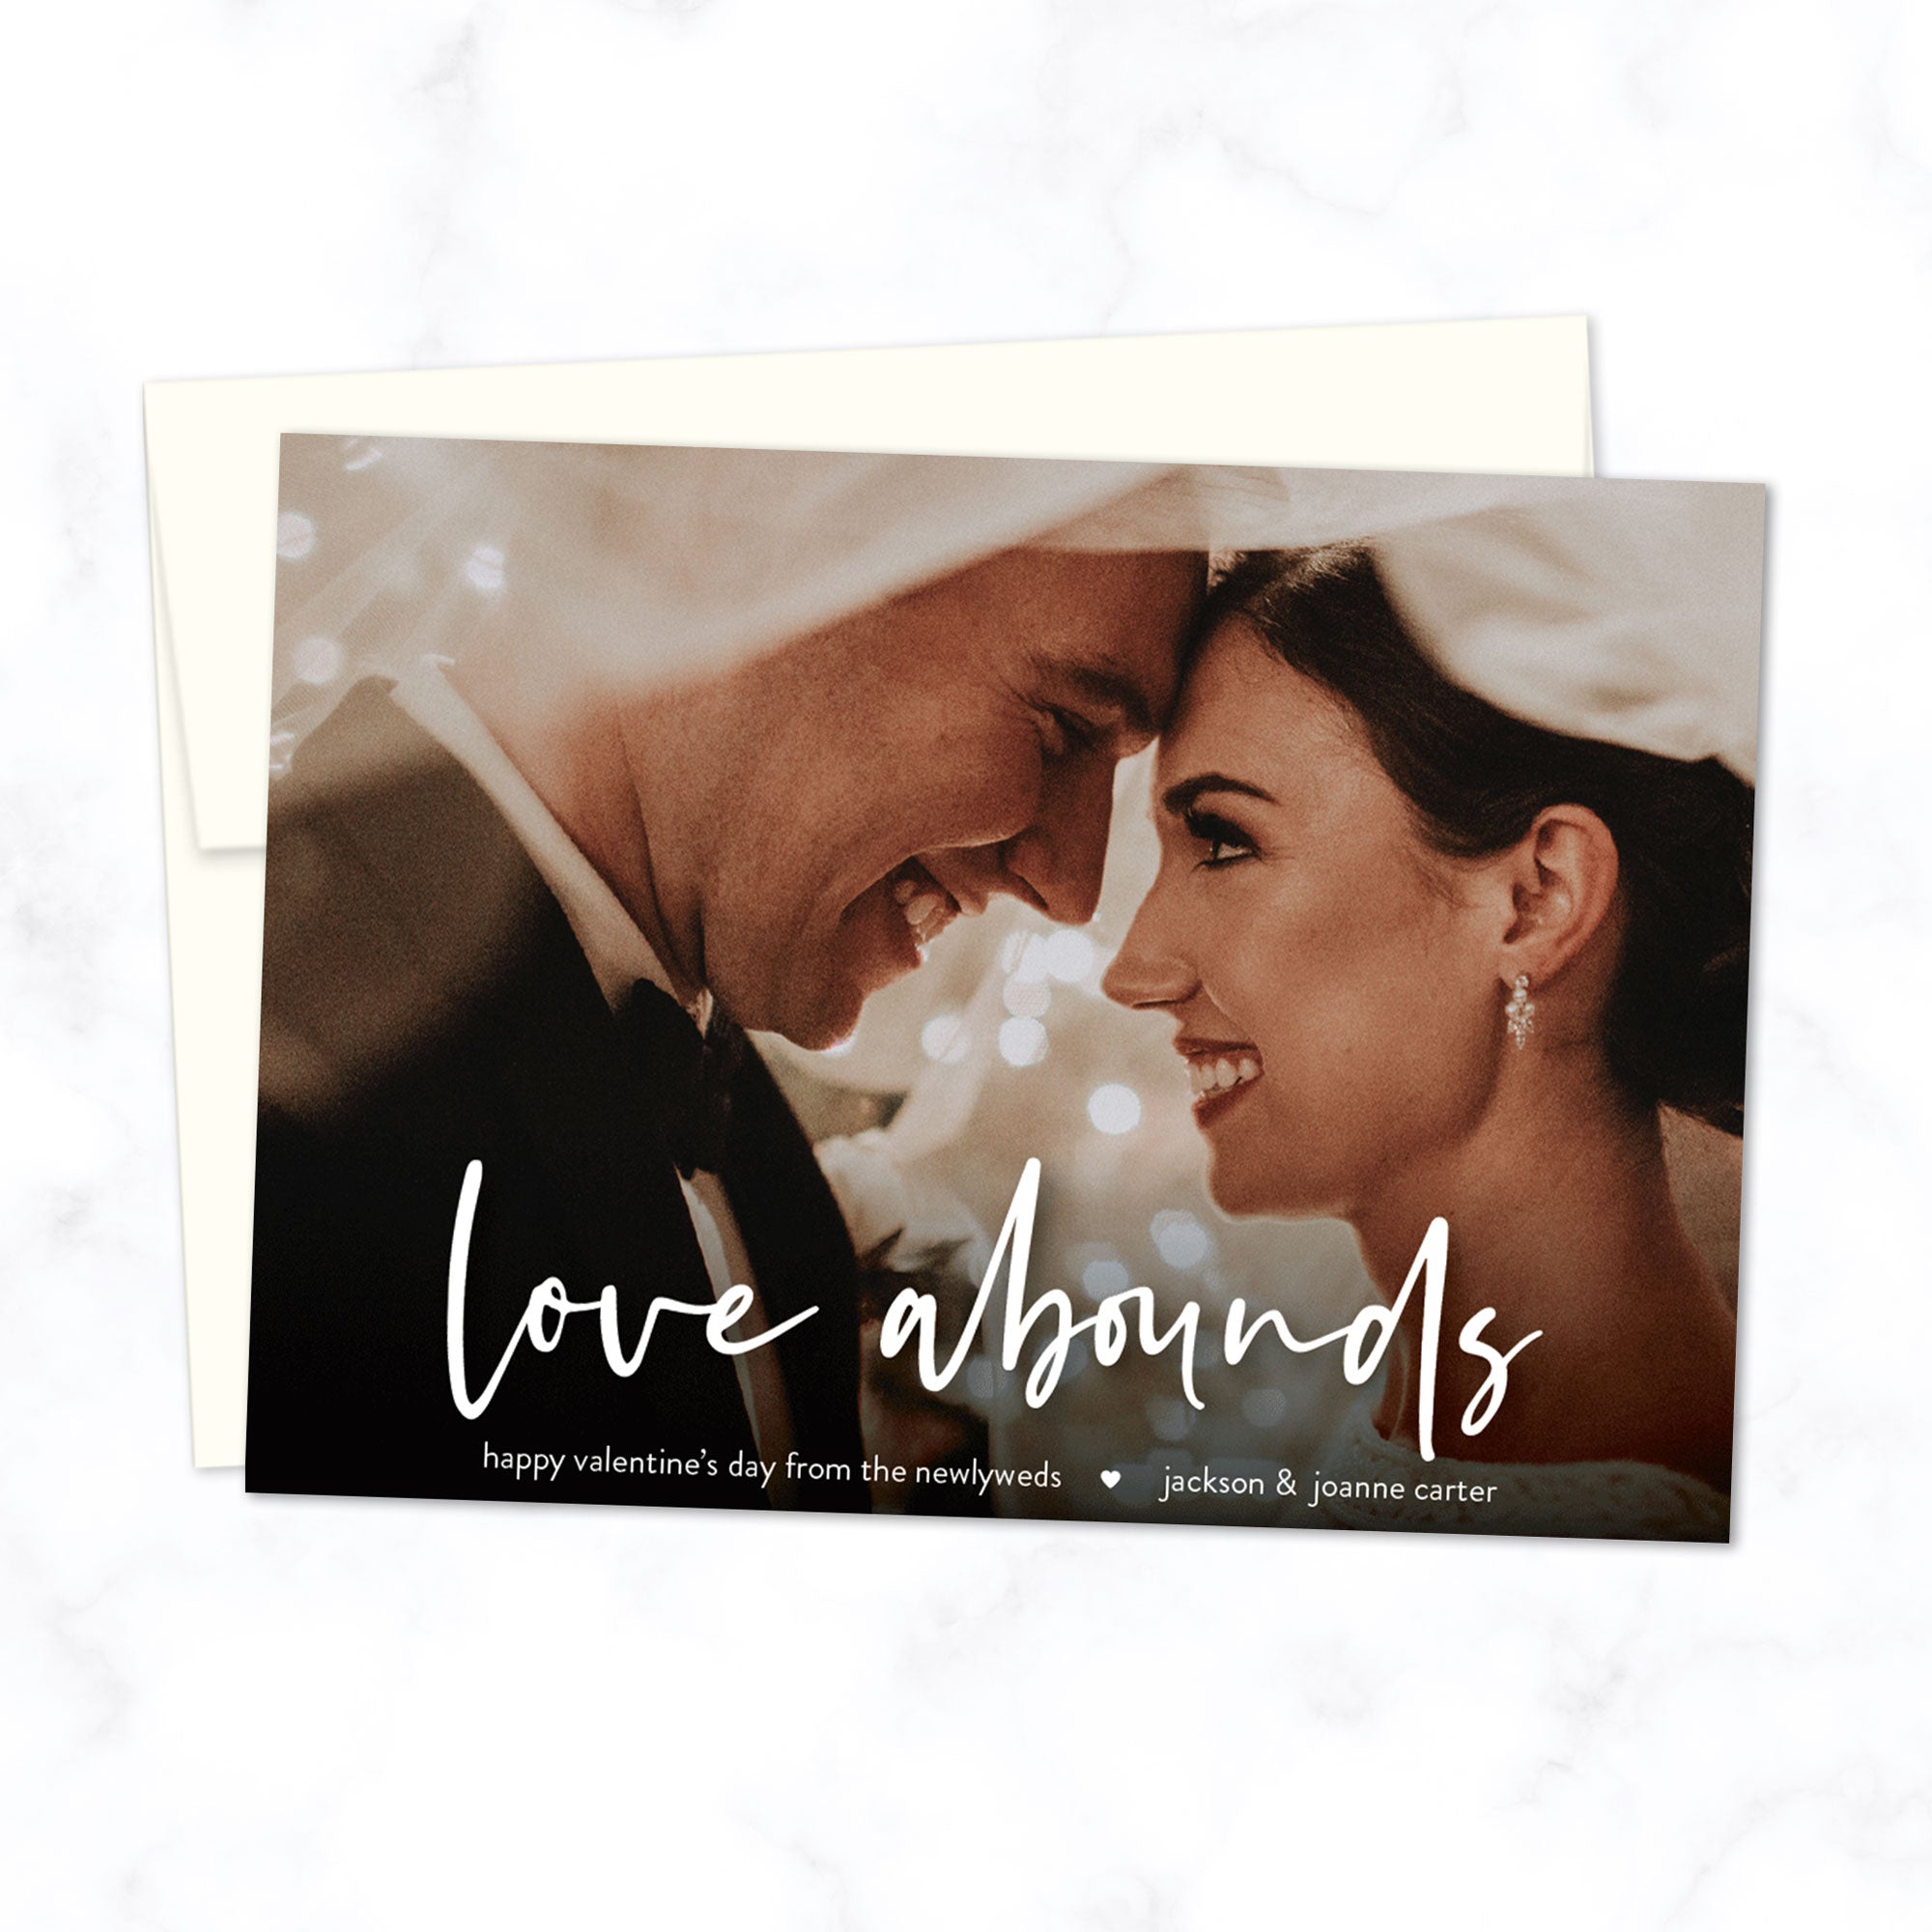 Valentine's Day / wedding newlyweds Custom Photo Card with Full Photo Background and Modern Script Font "love abounds" - Custom printed A7 cards with envelopes